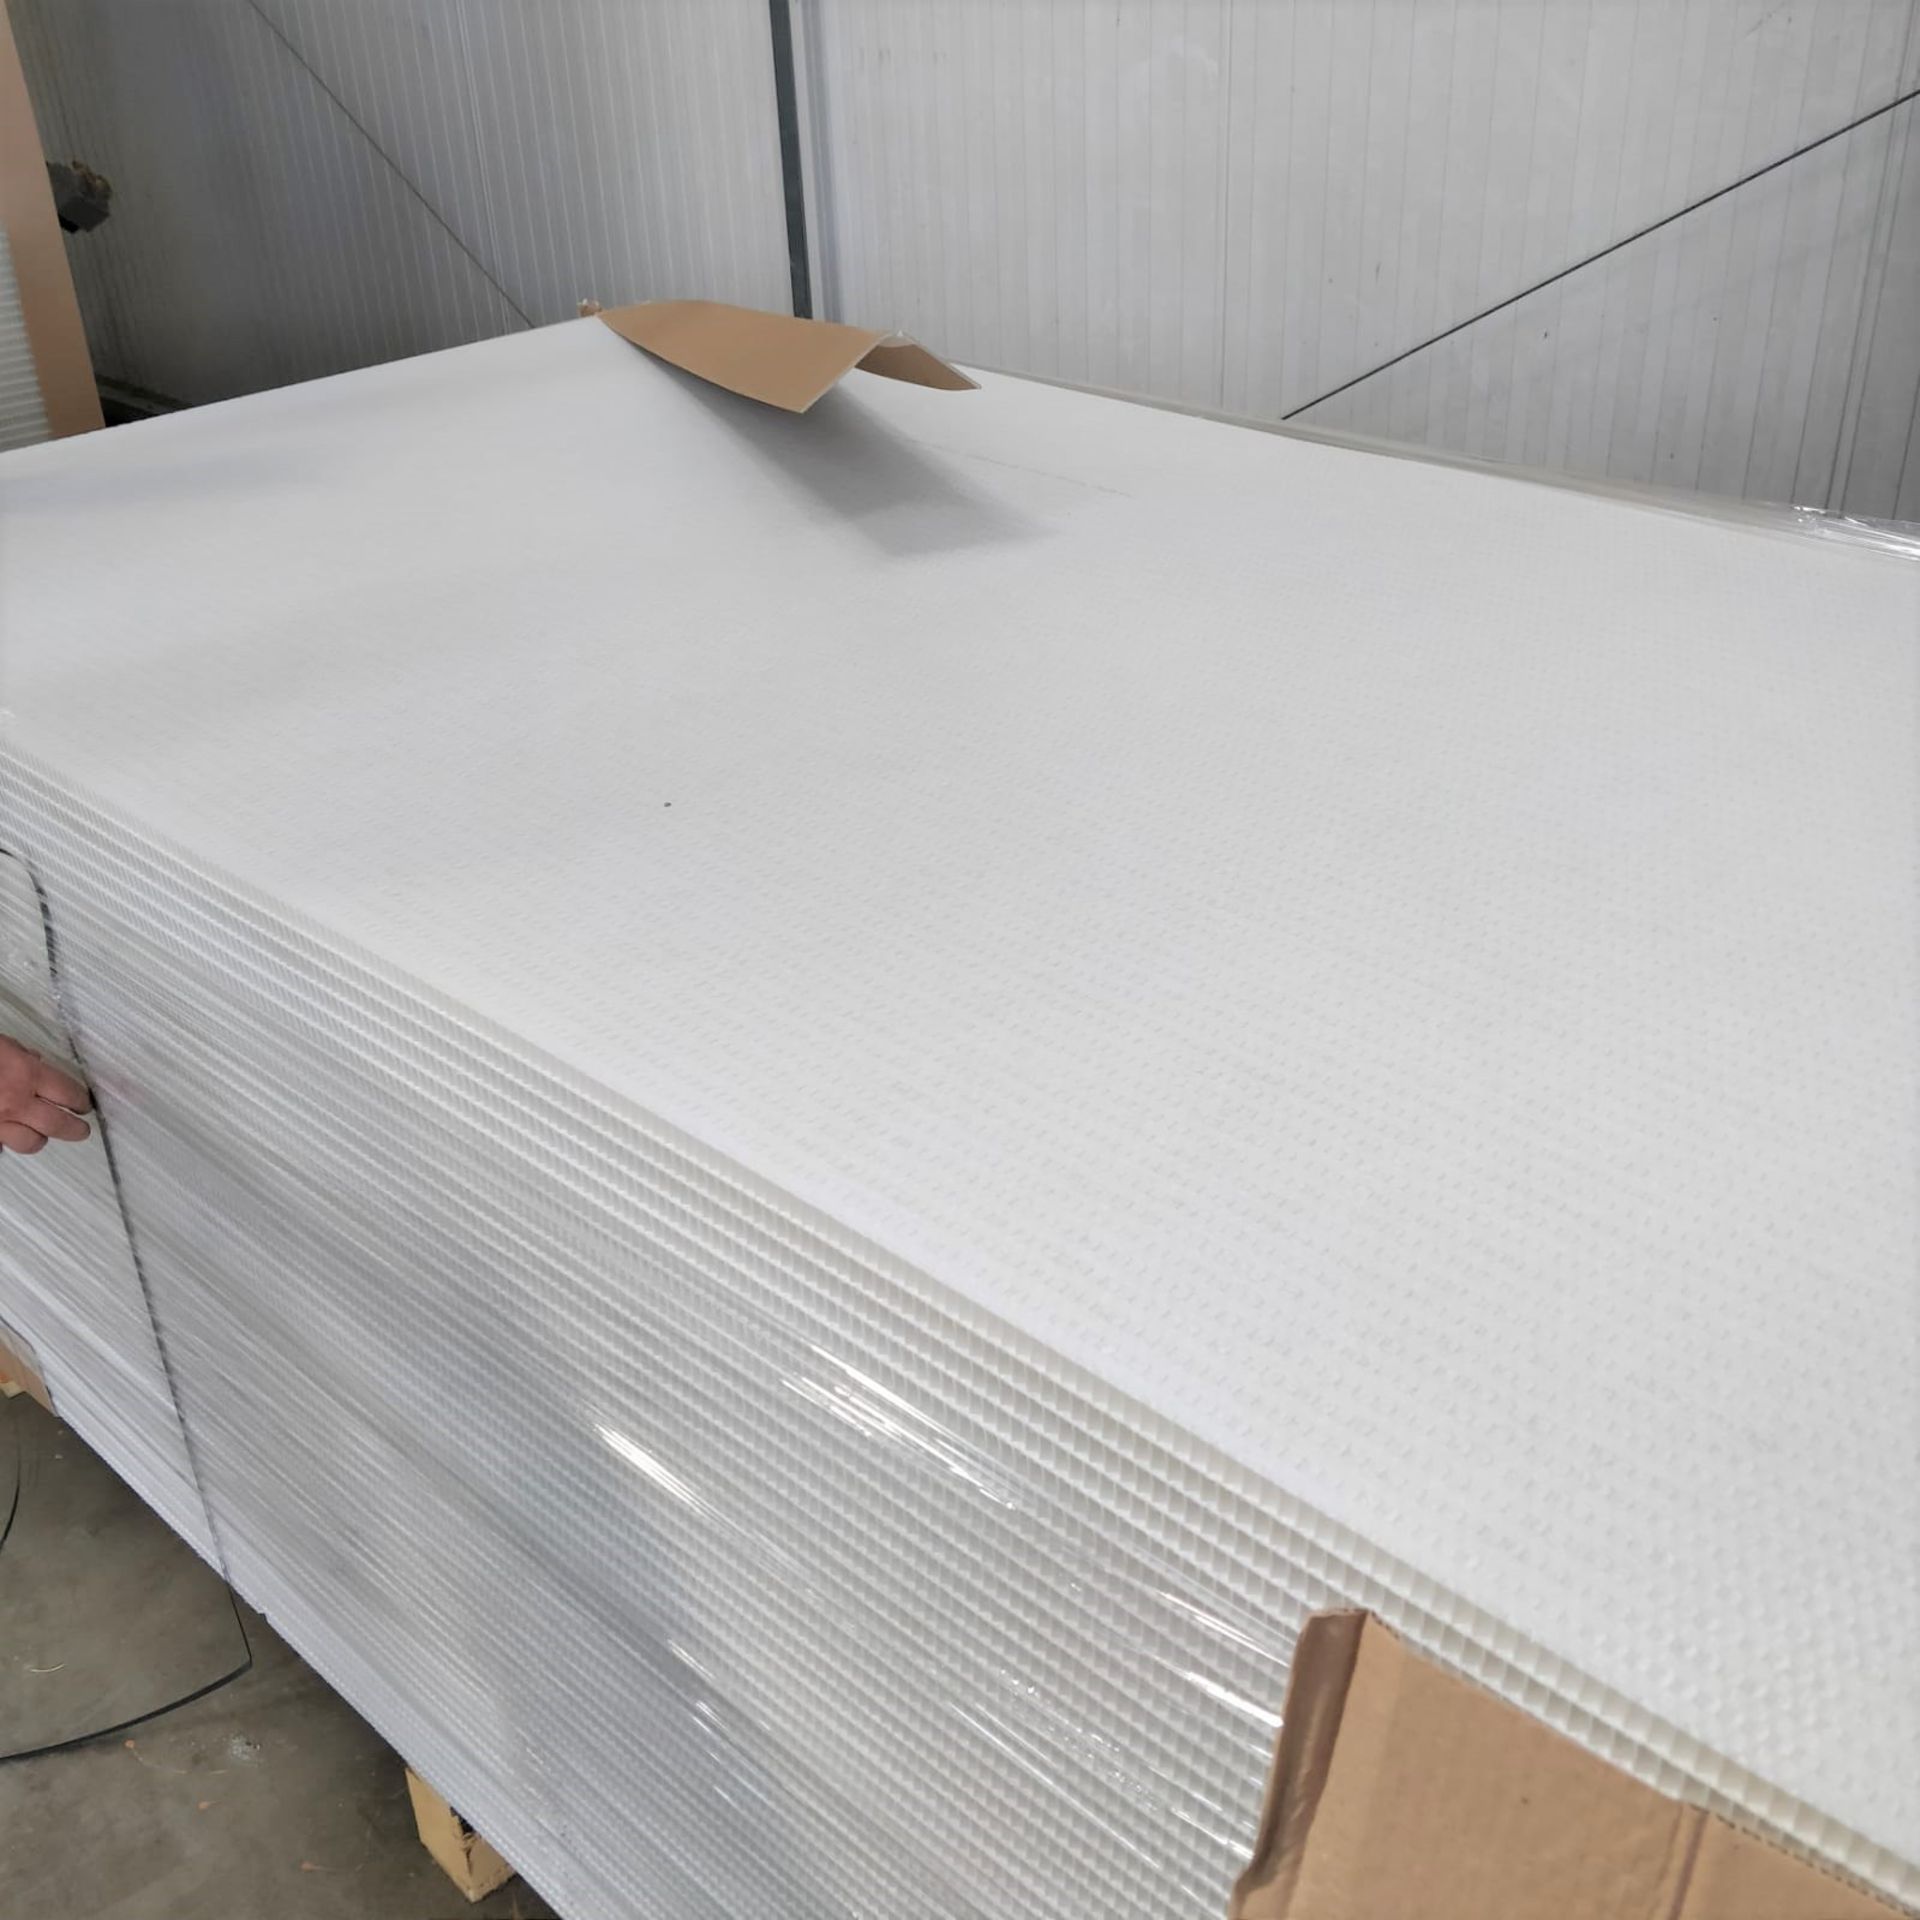 24 x ThermHex Thermoplastic Honeycomb Core Panels - Size 3175 x 1210 x 20mm - New Stock - - Image 6 of 7